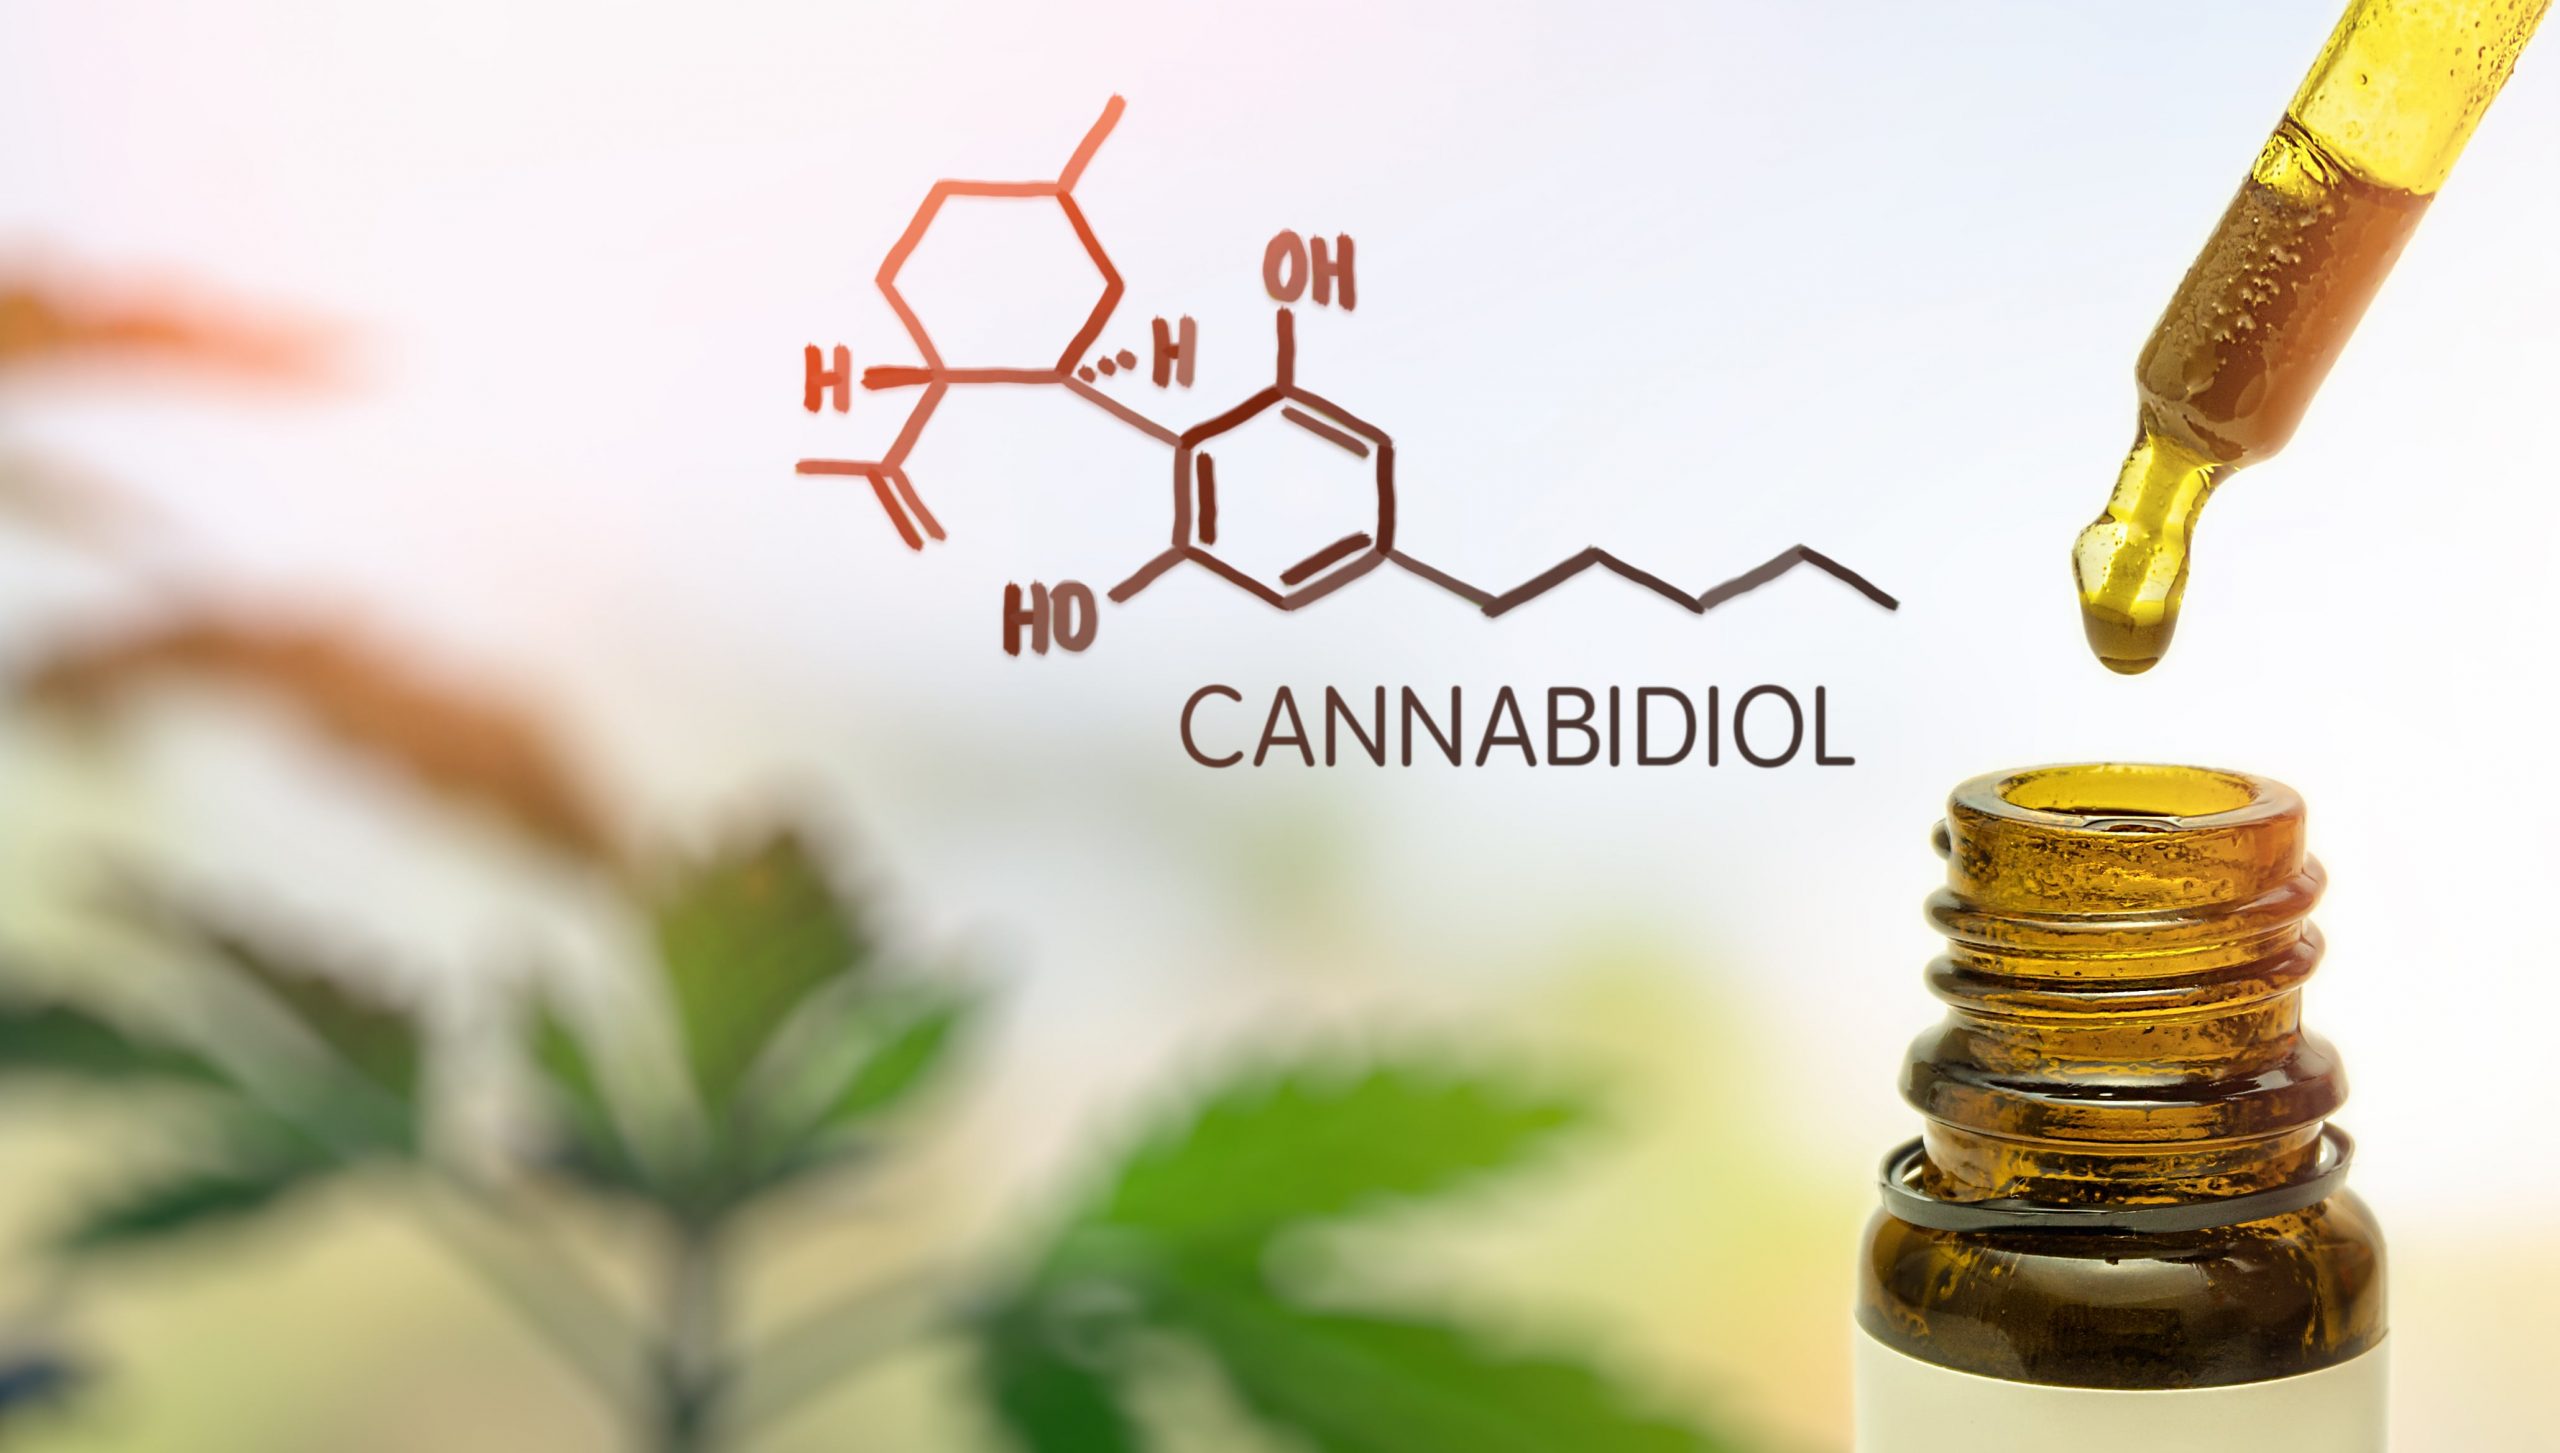 CAN CANNABIDIOL HELP IF YOU HAVE A STOMACH BUG?